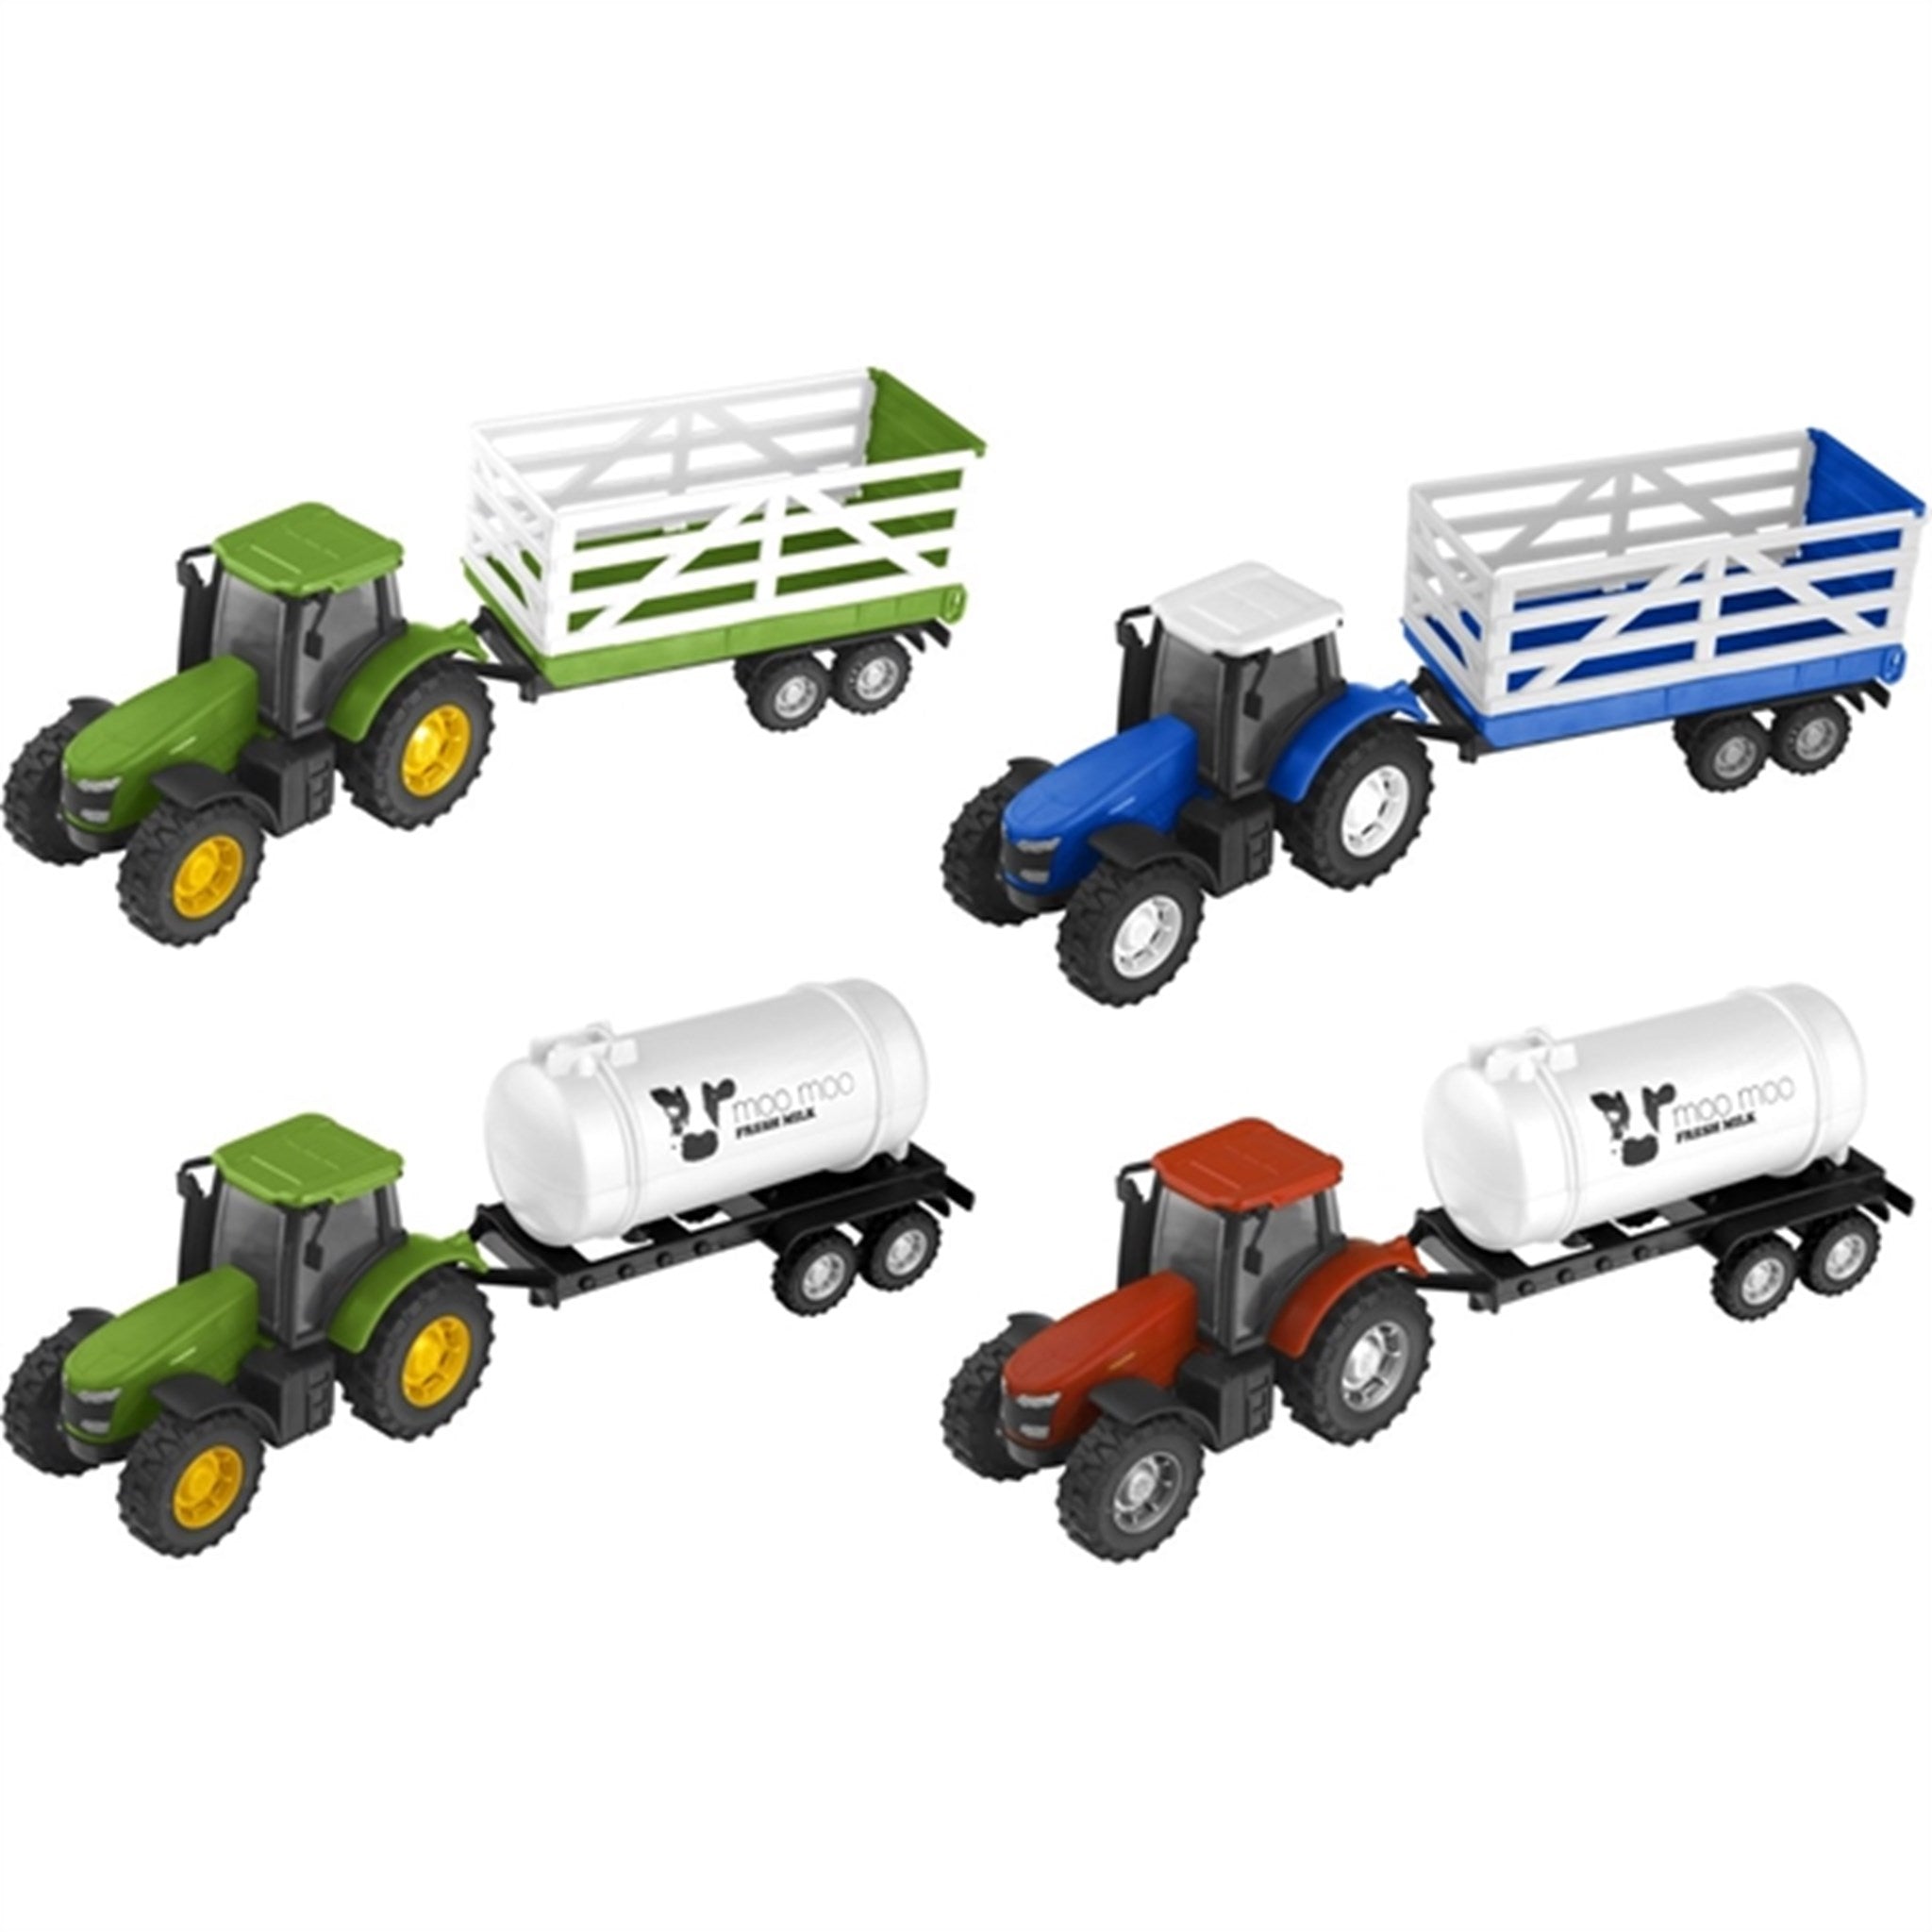 Teamsterz Tractor and Trailer Green Milk Tank 2